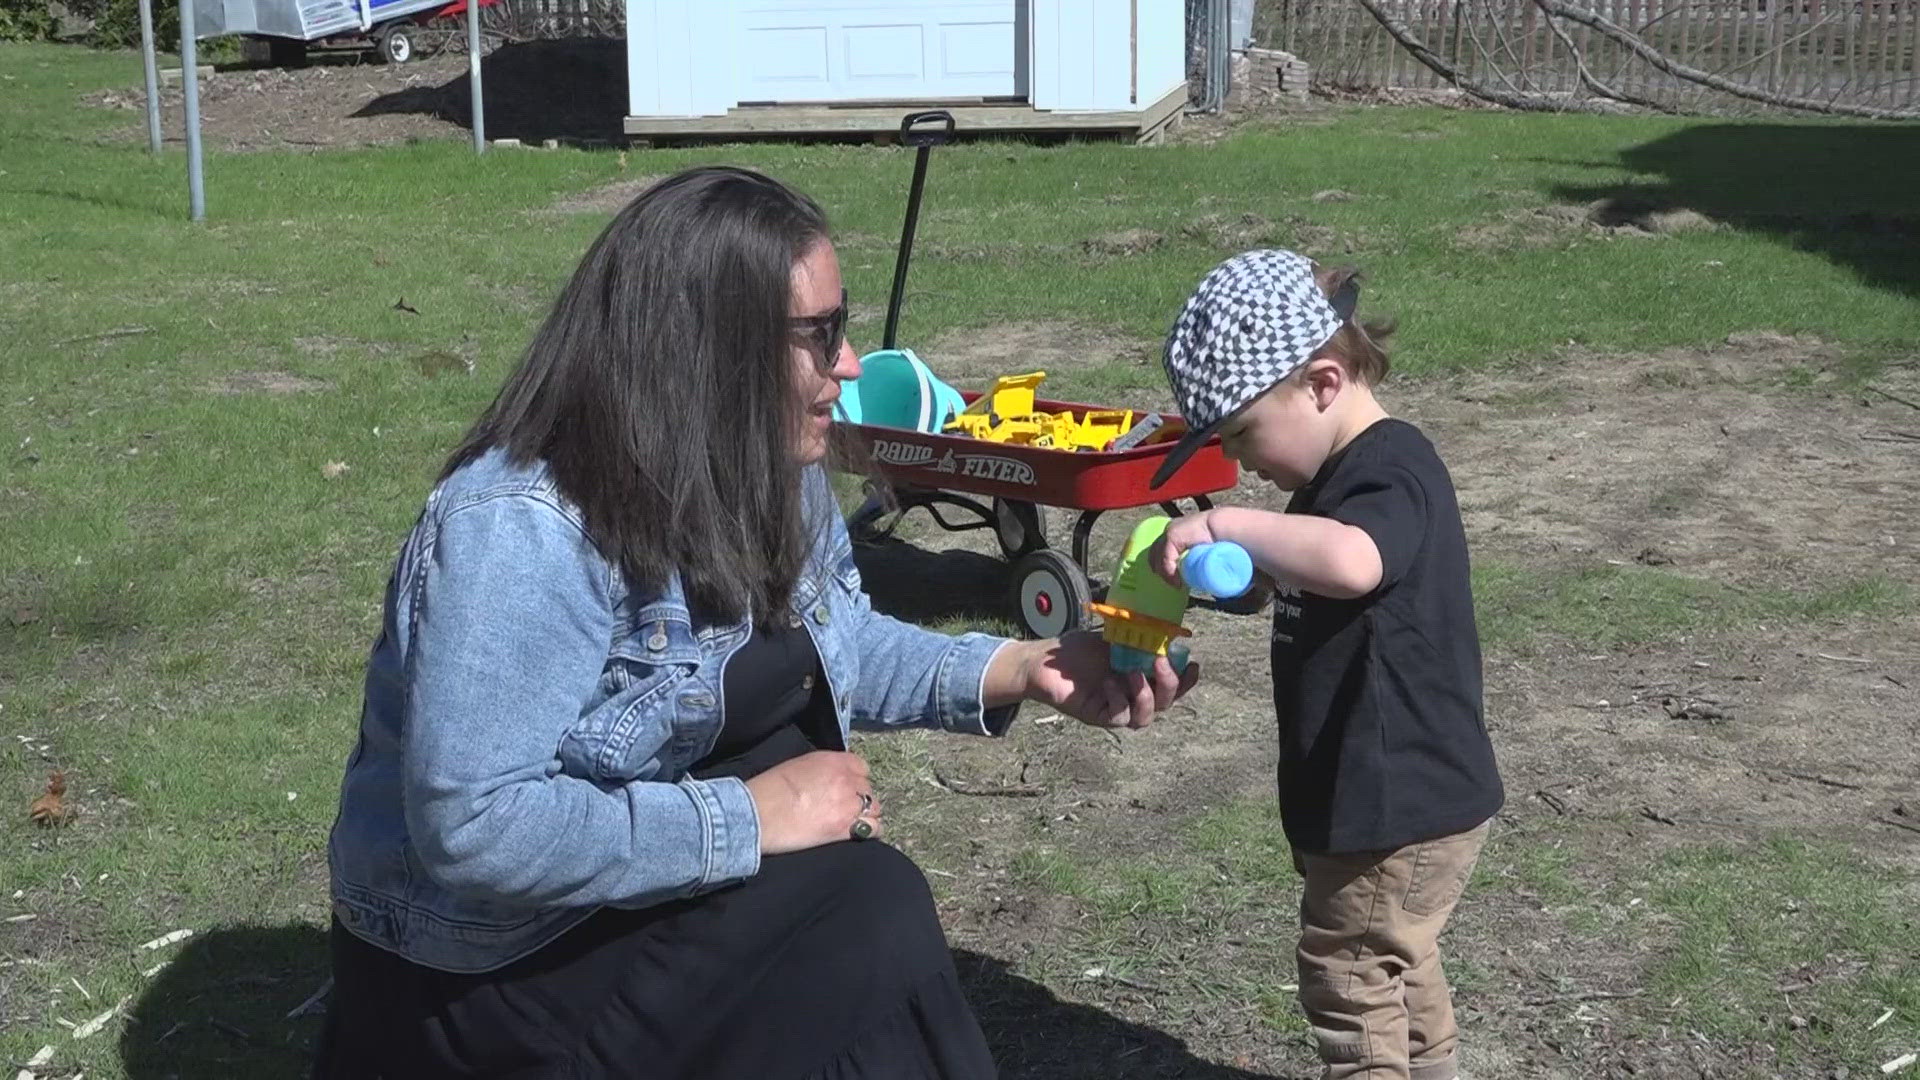 April Tardiff and her son, Grayson, from Old Orchard Beach are planning to take part in the Strolling Thunder event with families from across the country.